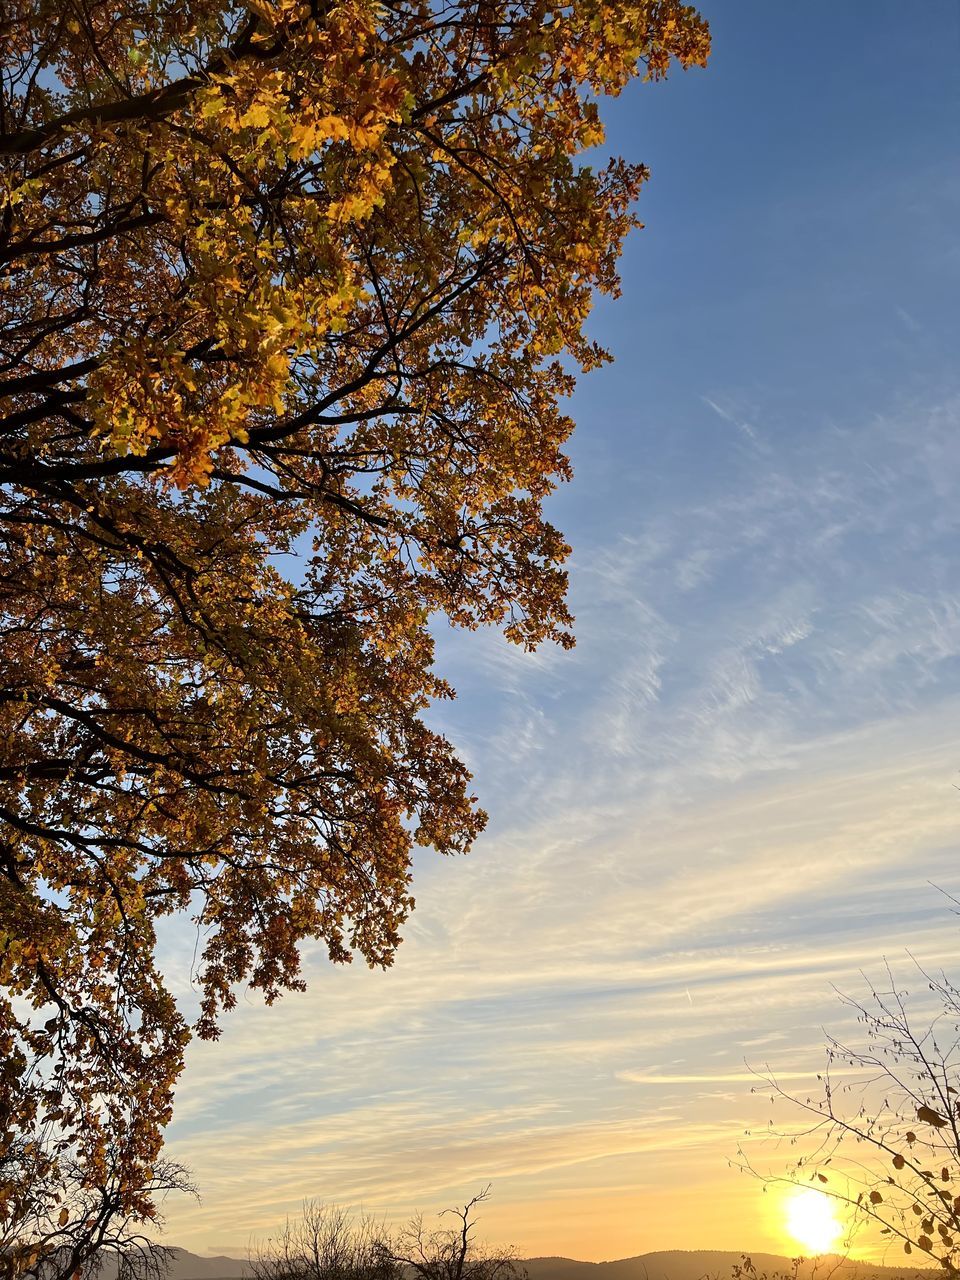 tree, sky, plant, beauty in nature, nature, sunset, sunlight, scenics - nature, cloud, tranquility, landscape, environment, no people, tranquil scene, autumn, orange color, land, silhouette, outdoors, idyllic, evening, growth, non-urban scene, yellow, branch, sun, leaf, plant part, back lit, rural scene, low angle view, blue